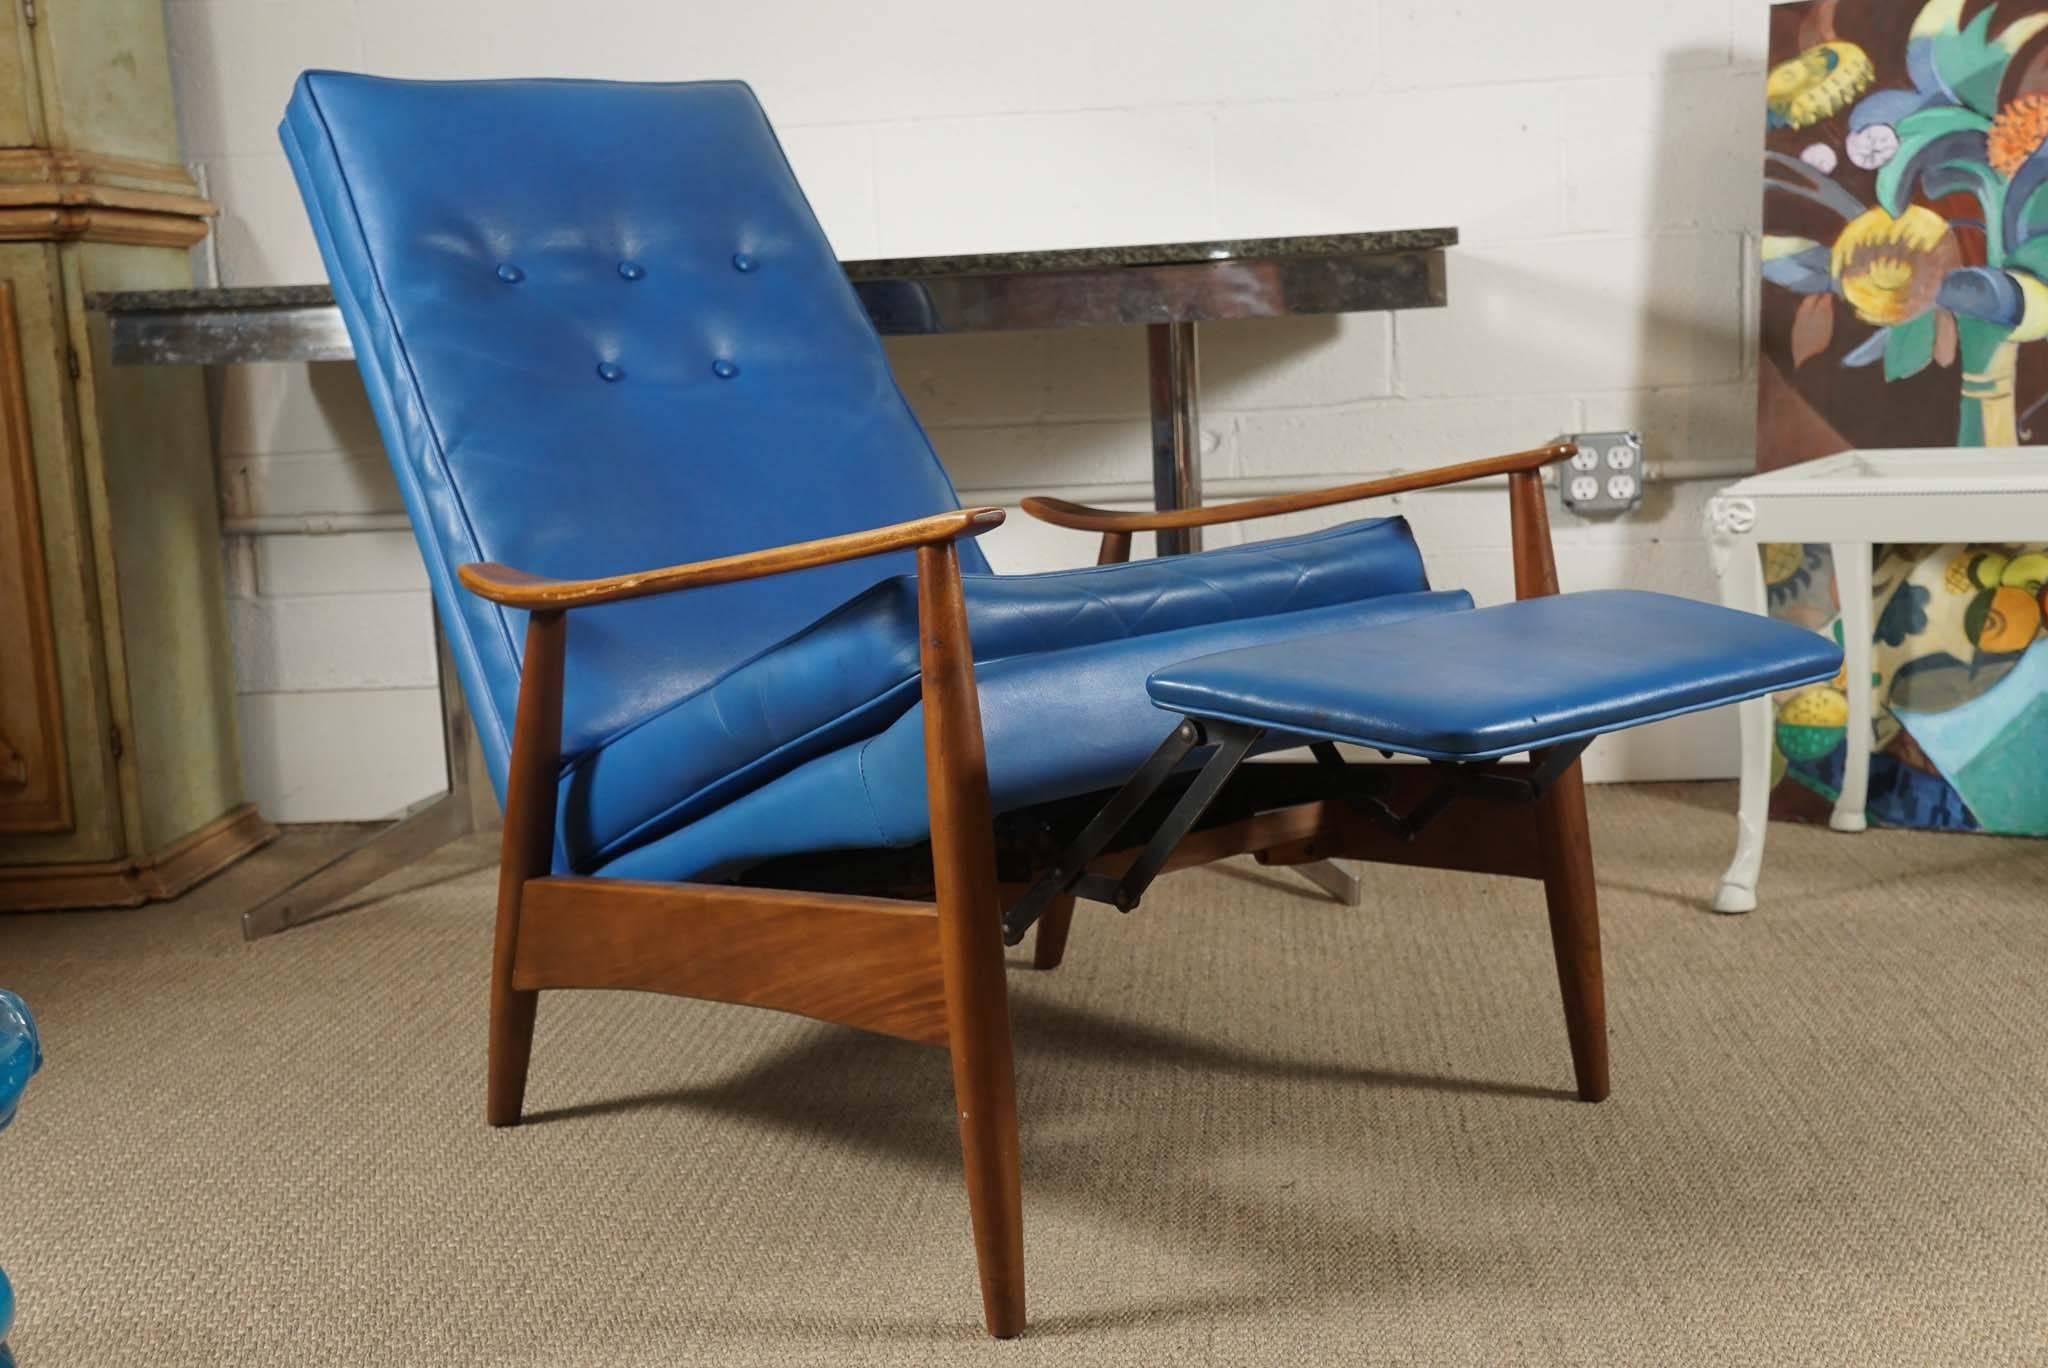 Here is a great modern armchair in a brilliant blue vinyl that also reclines.
The chair is by Milo Baughman for Thayer Coggin.